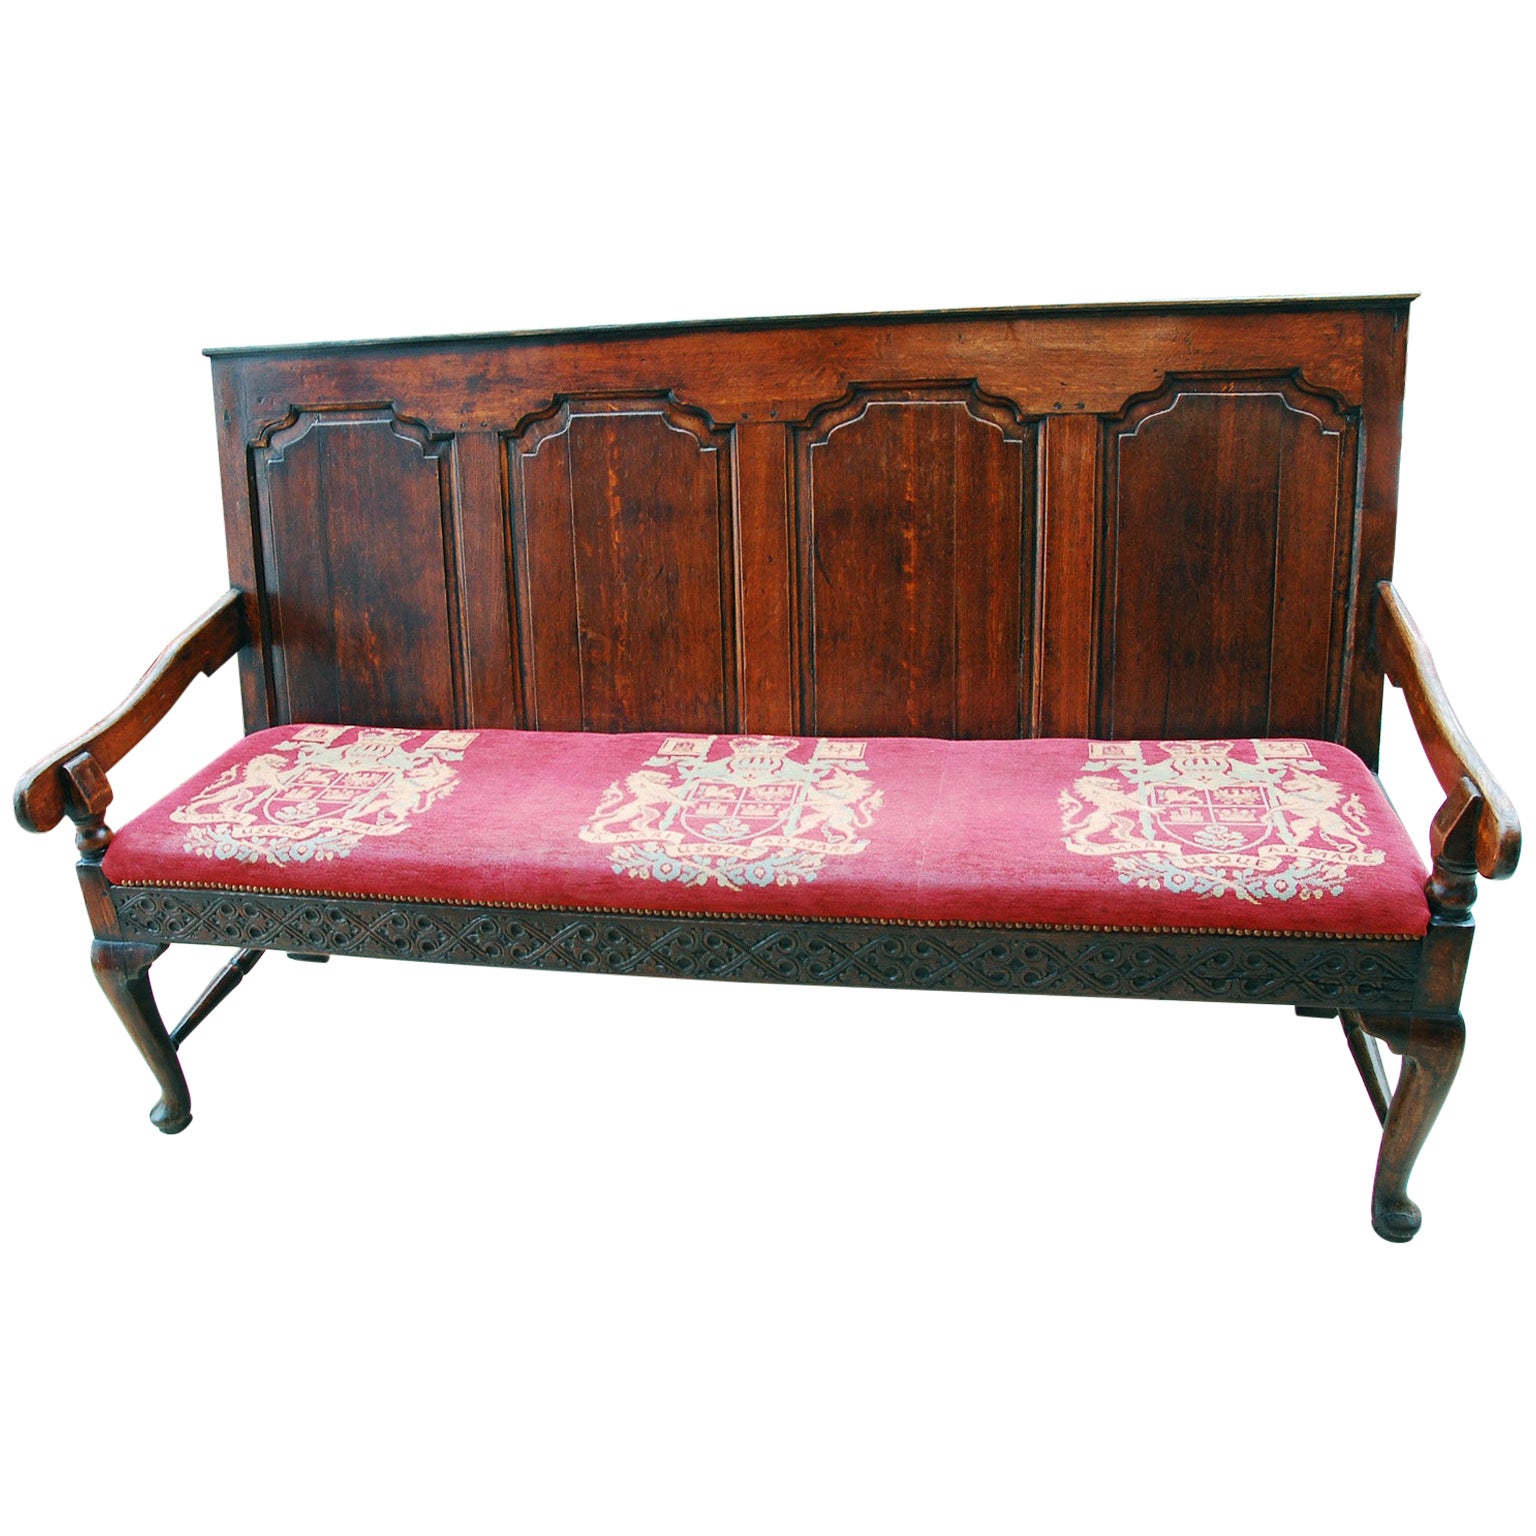 English George II Oak Settle with Paneled Back, Carved Front Rail, Cabriole Legs